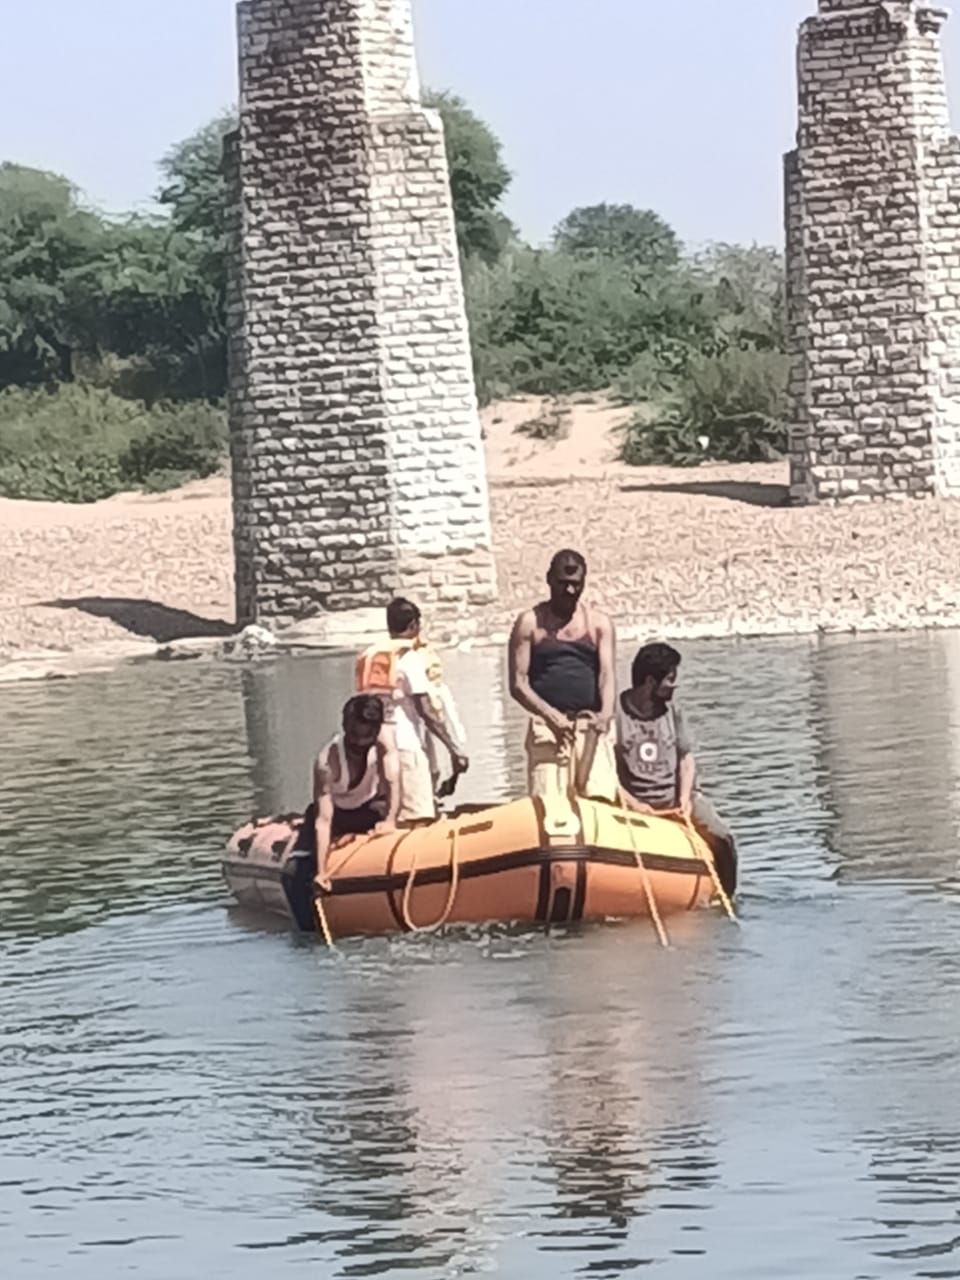 Dead body of youth drowned in river